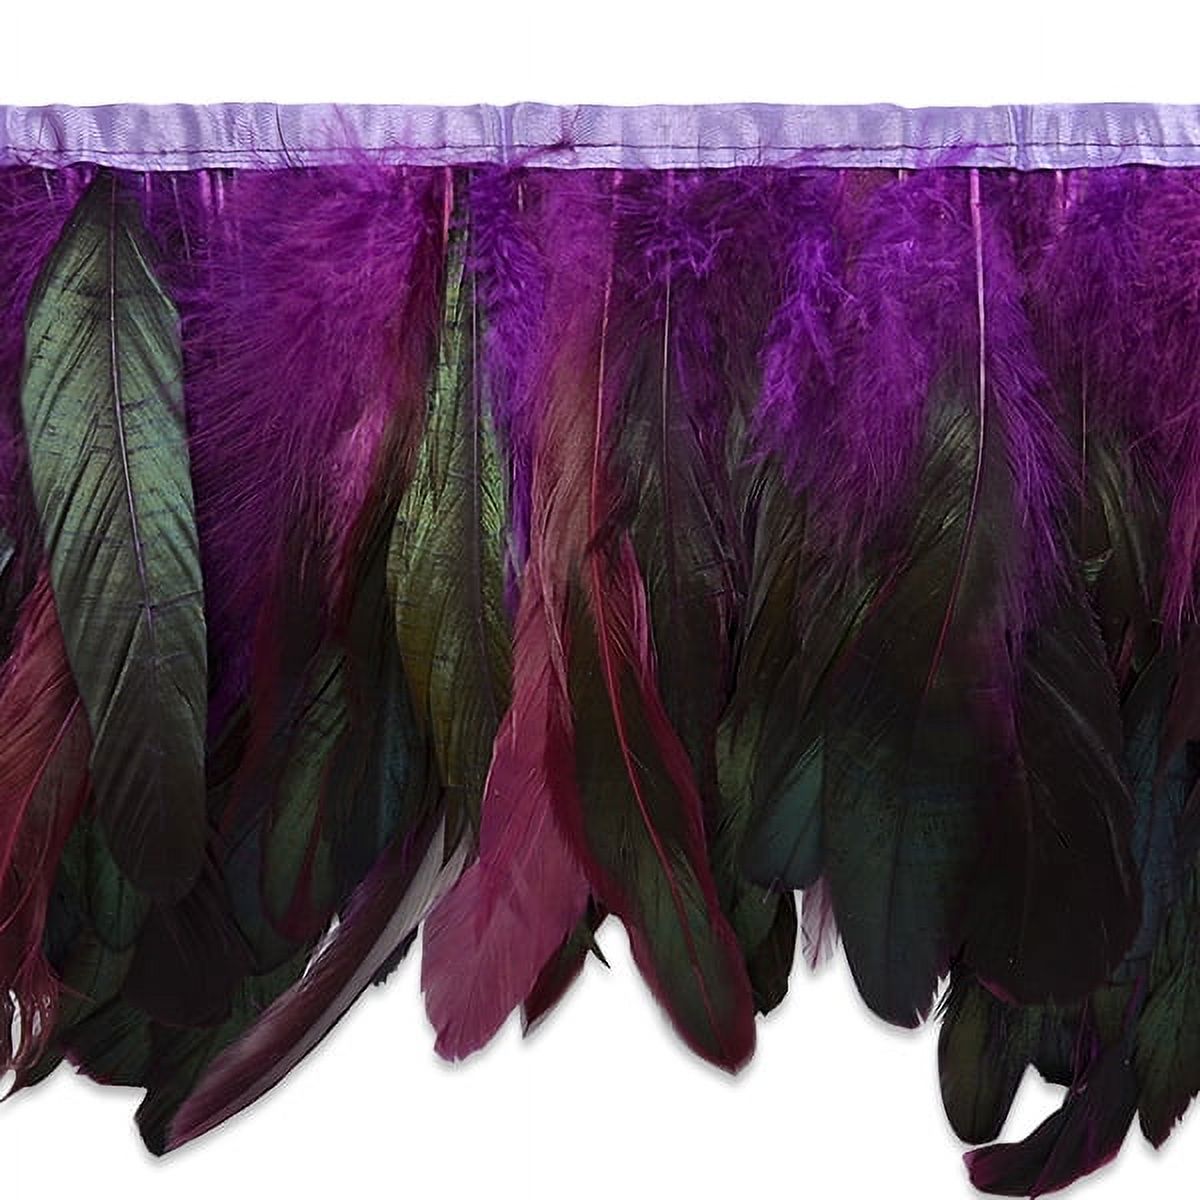 Expo Int'L Fionna Feather Fringe Trim By The Yard - image 1 of 2